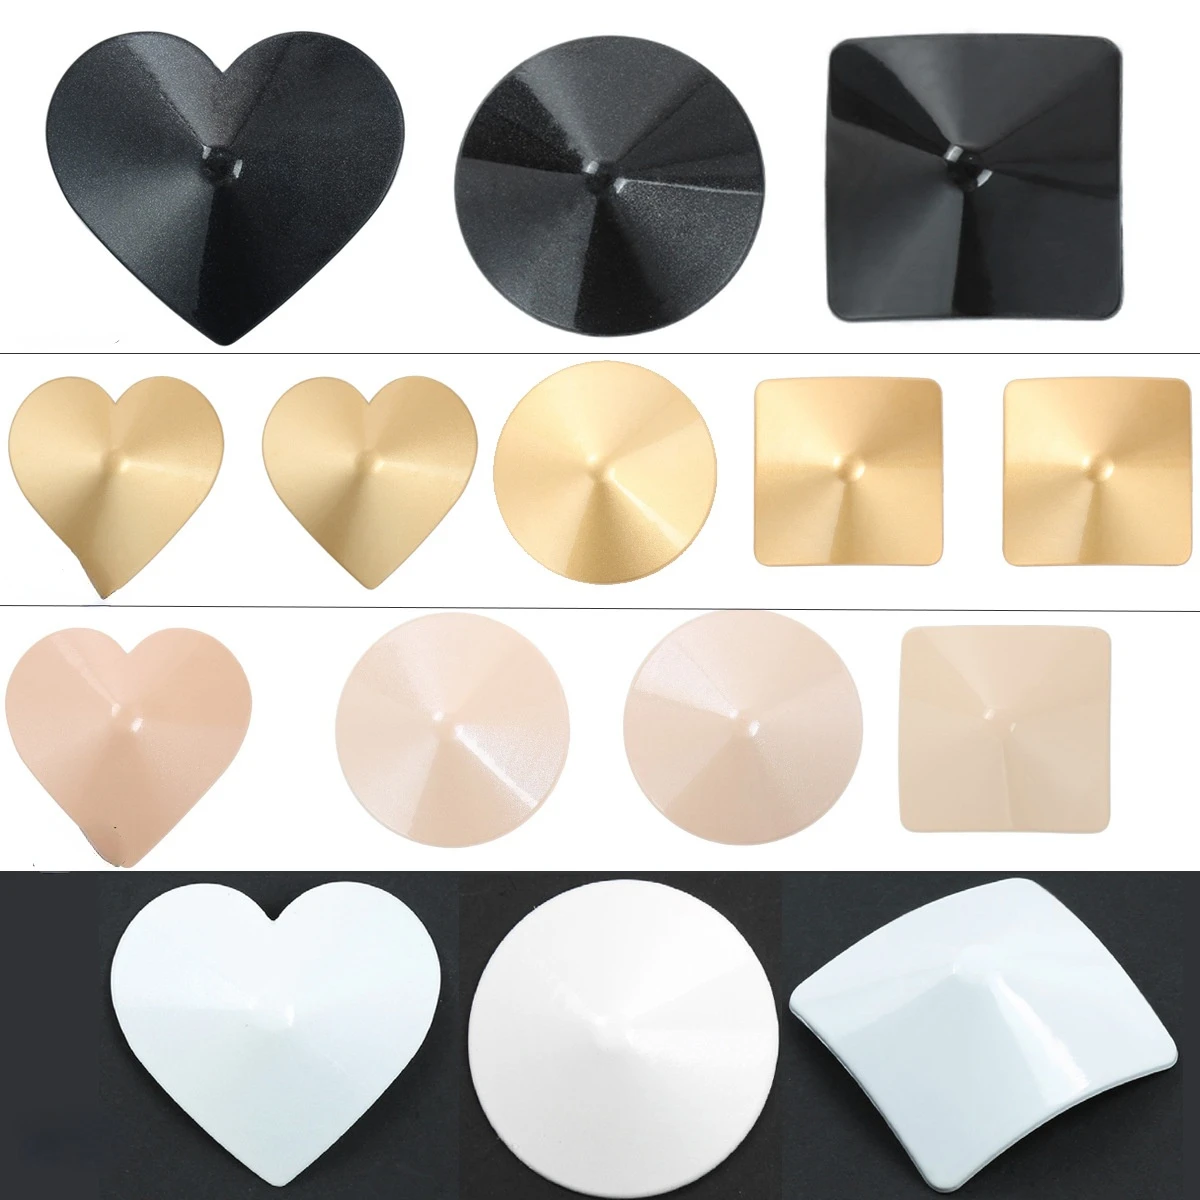 Metal Nipple Covers Breast Chest Pasties Stickers Round Square Heart Shape Self Adhesive Breast Petals Women Sexy Sticky Bra